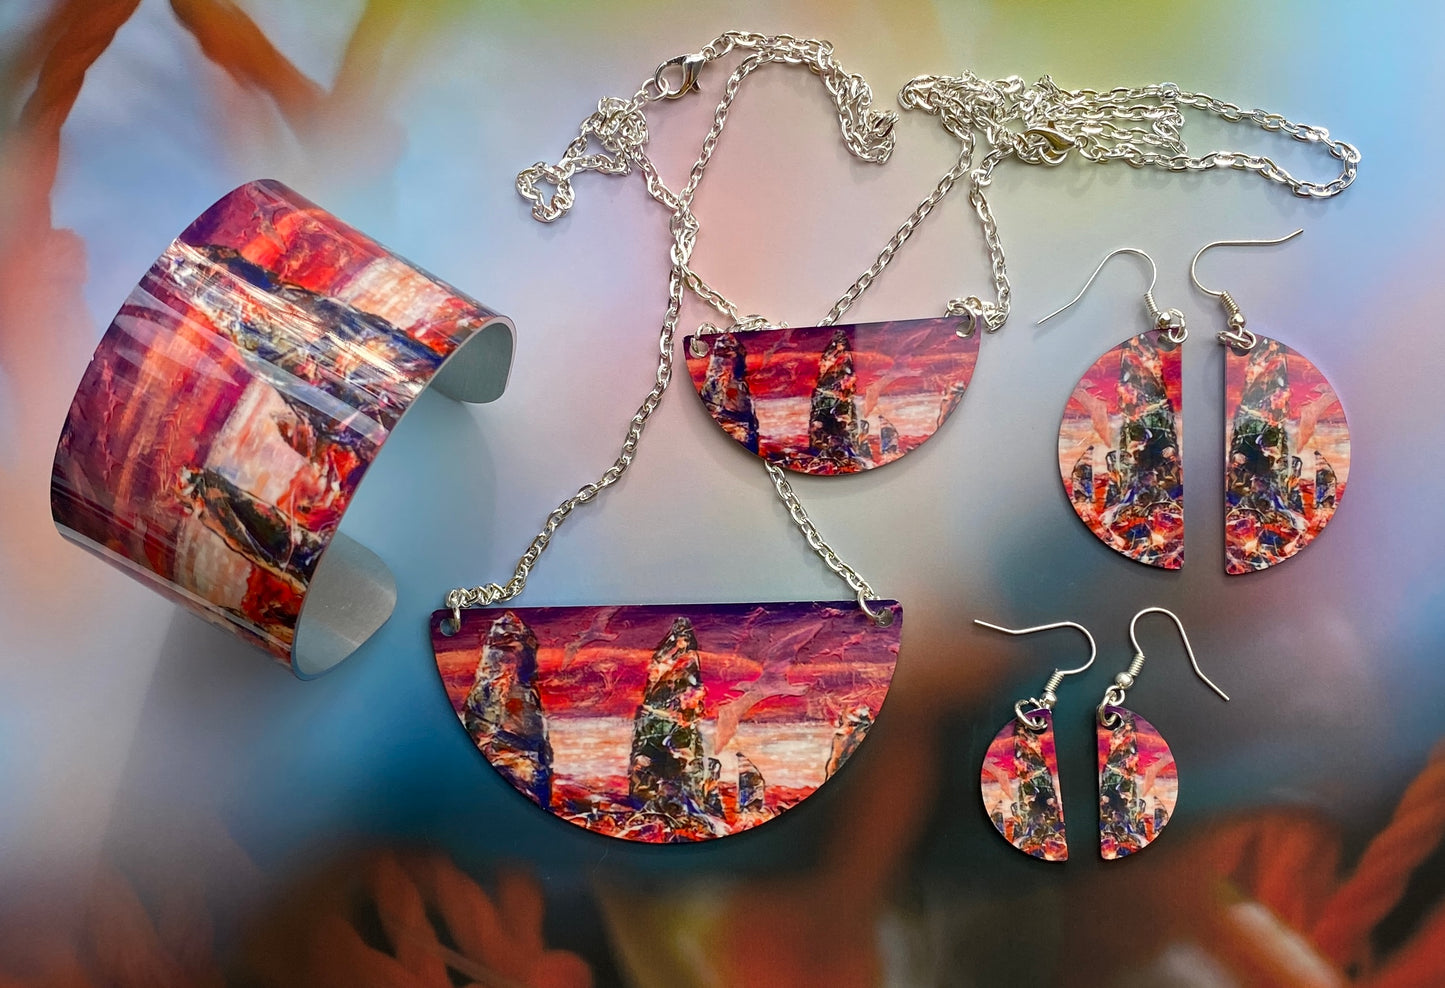 A collection of jewellery designs of  Wild sunset at The Ring of Brodgar by Orkney artist Jane Glue, Scotland